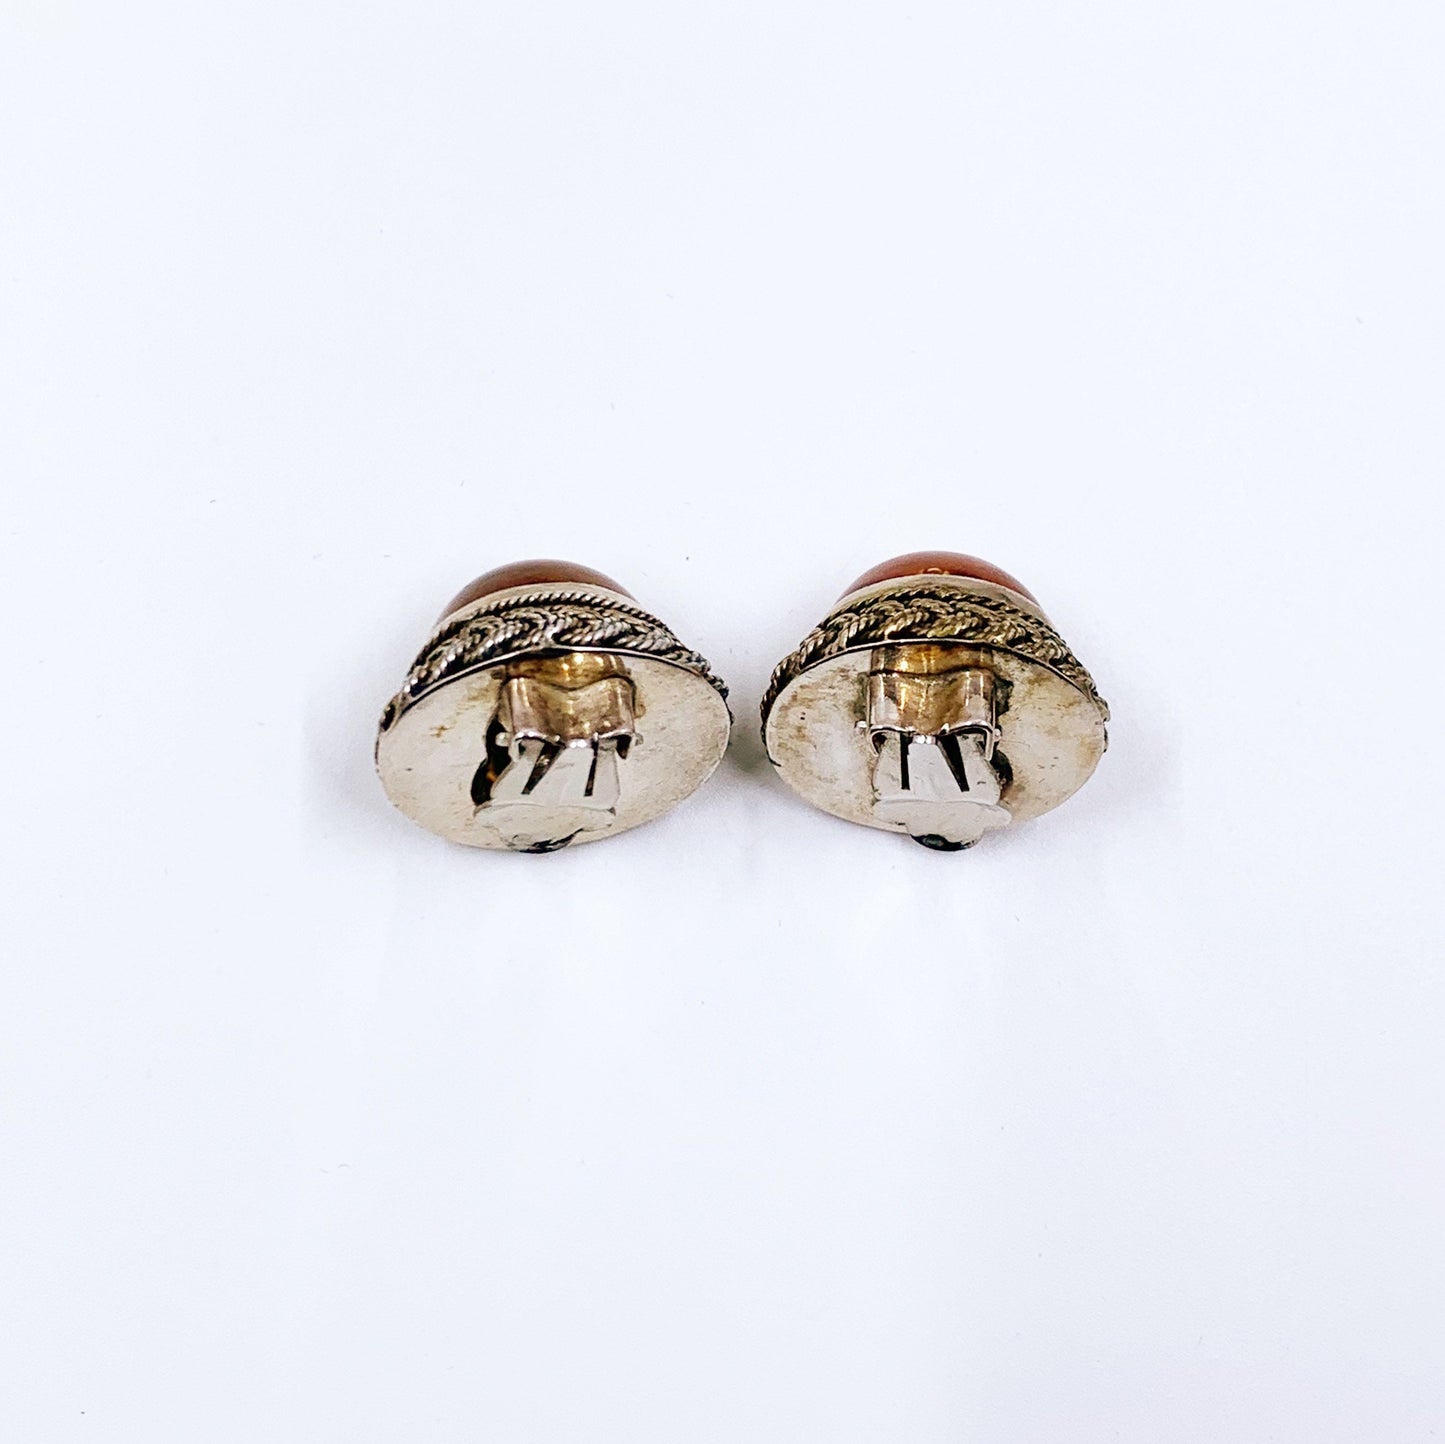 Vintage Silver Amber Clip On Earrings | Vintage Round Amber Roped Earrings